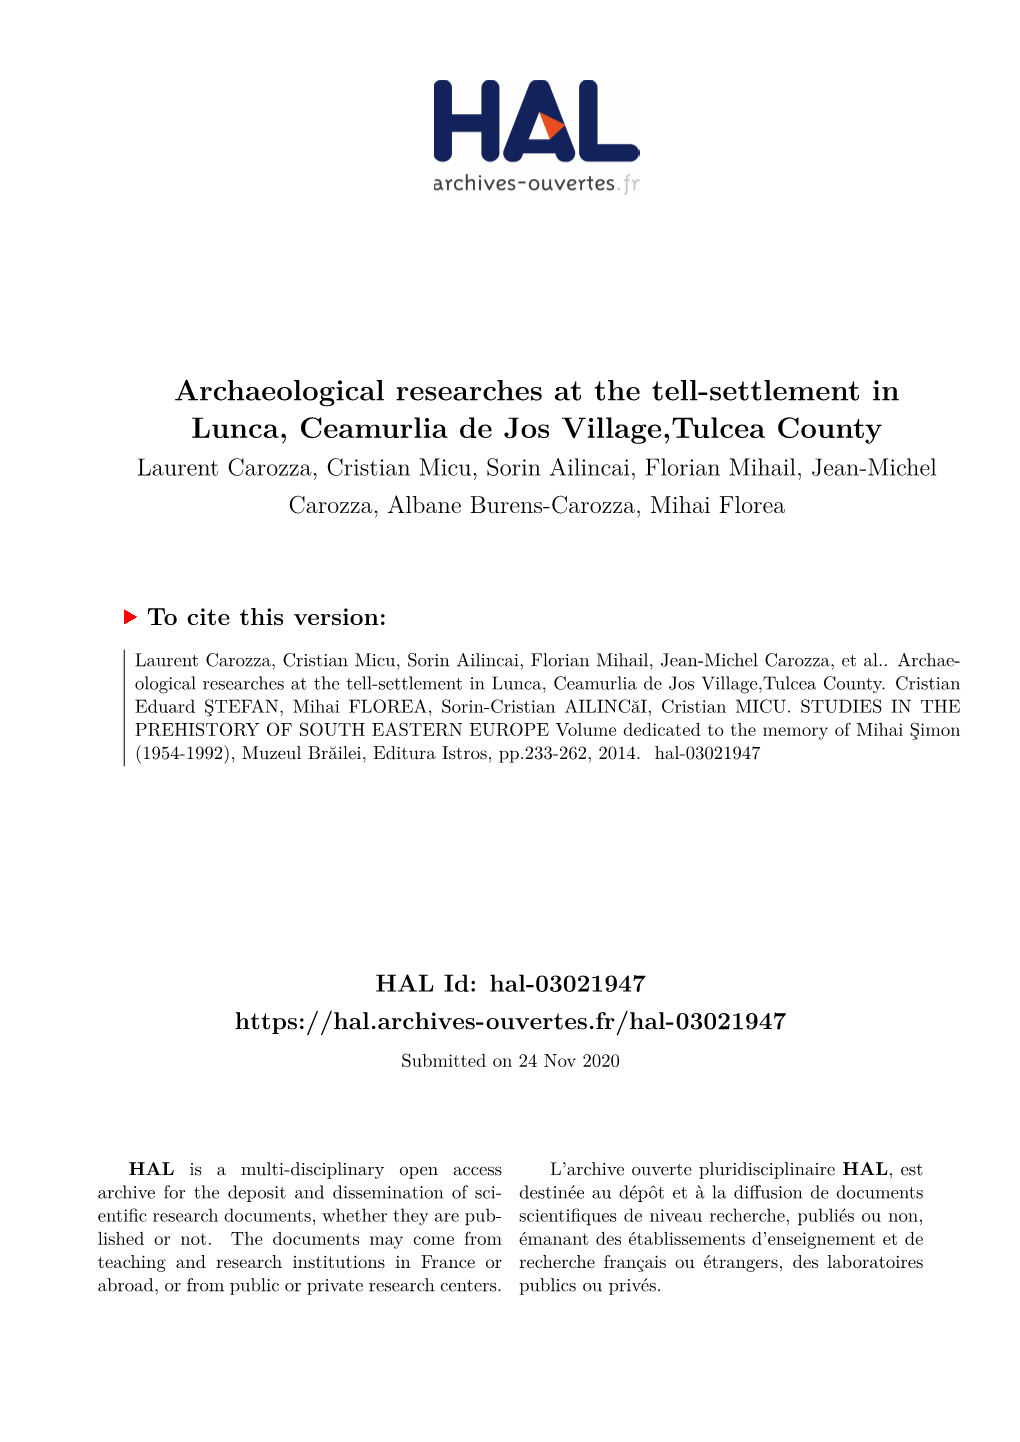 Archaeological Researches at the Tell-Settlement in Lunca, Ceamurlia